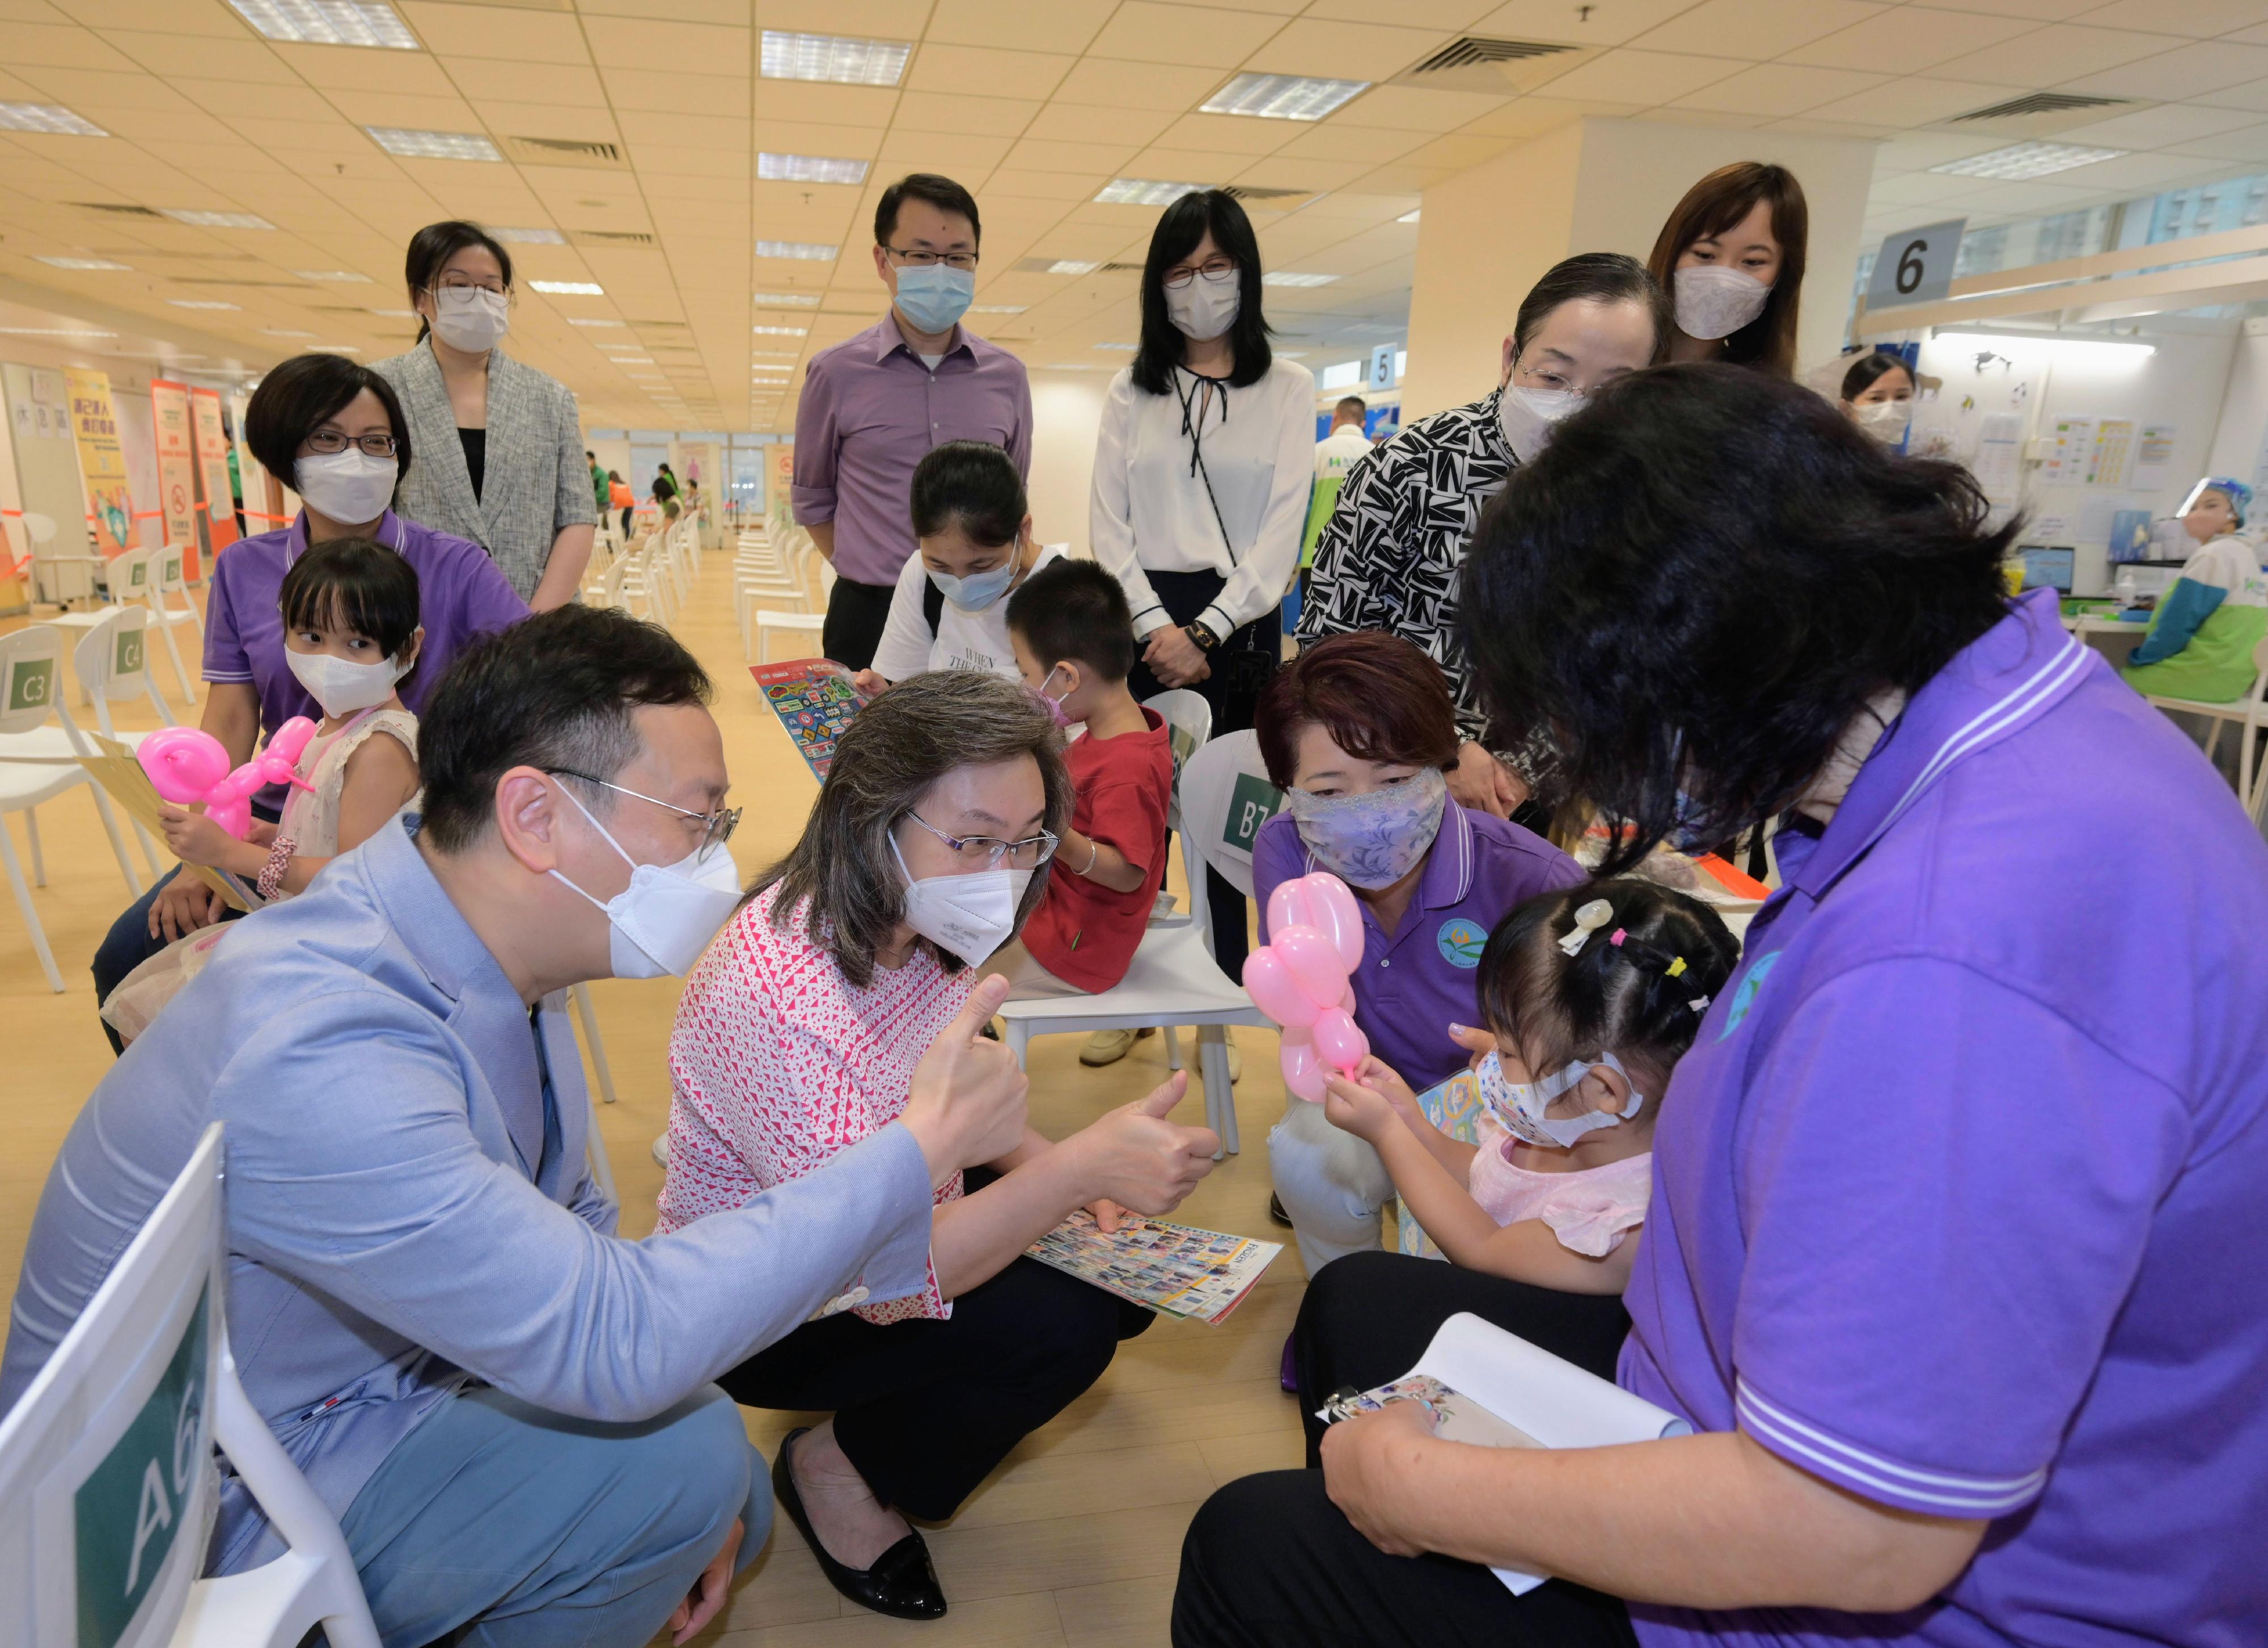 The Secretary for the Civil Service, Mrs Ingrid Yeung (second left), visited a Community Vaccination Centre in Kwun Tong today (August 4) to encourage the vaccination of children against COVID-19. Looking on are the Chairman of the Kwun Tong District Council, Mr Wilson Or (first left), and the Chairwoman of the Kowloon Women's Organisations Federation, Ms Ann So (third left). 